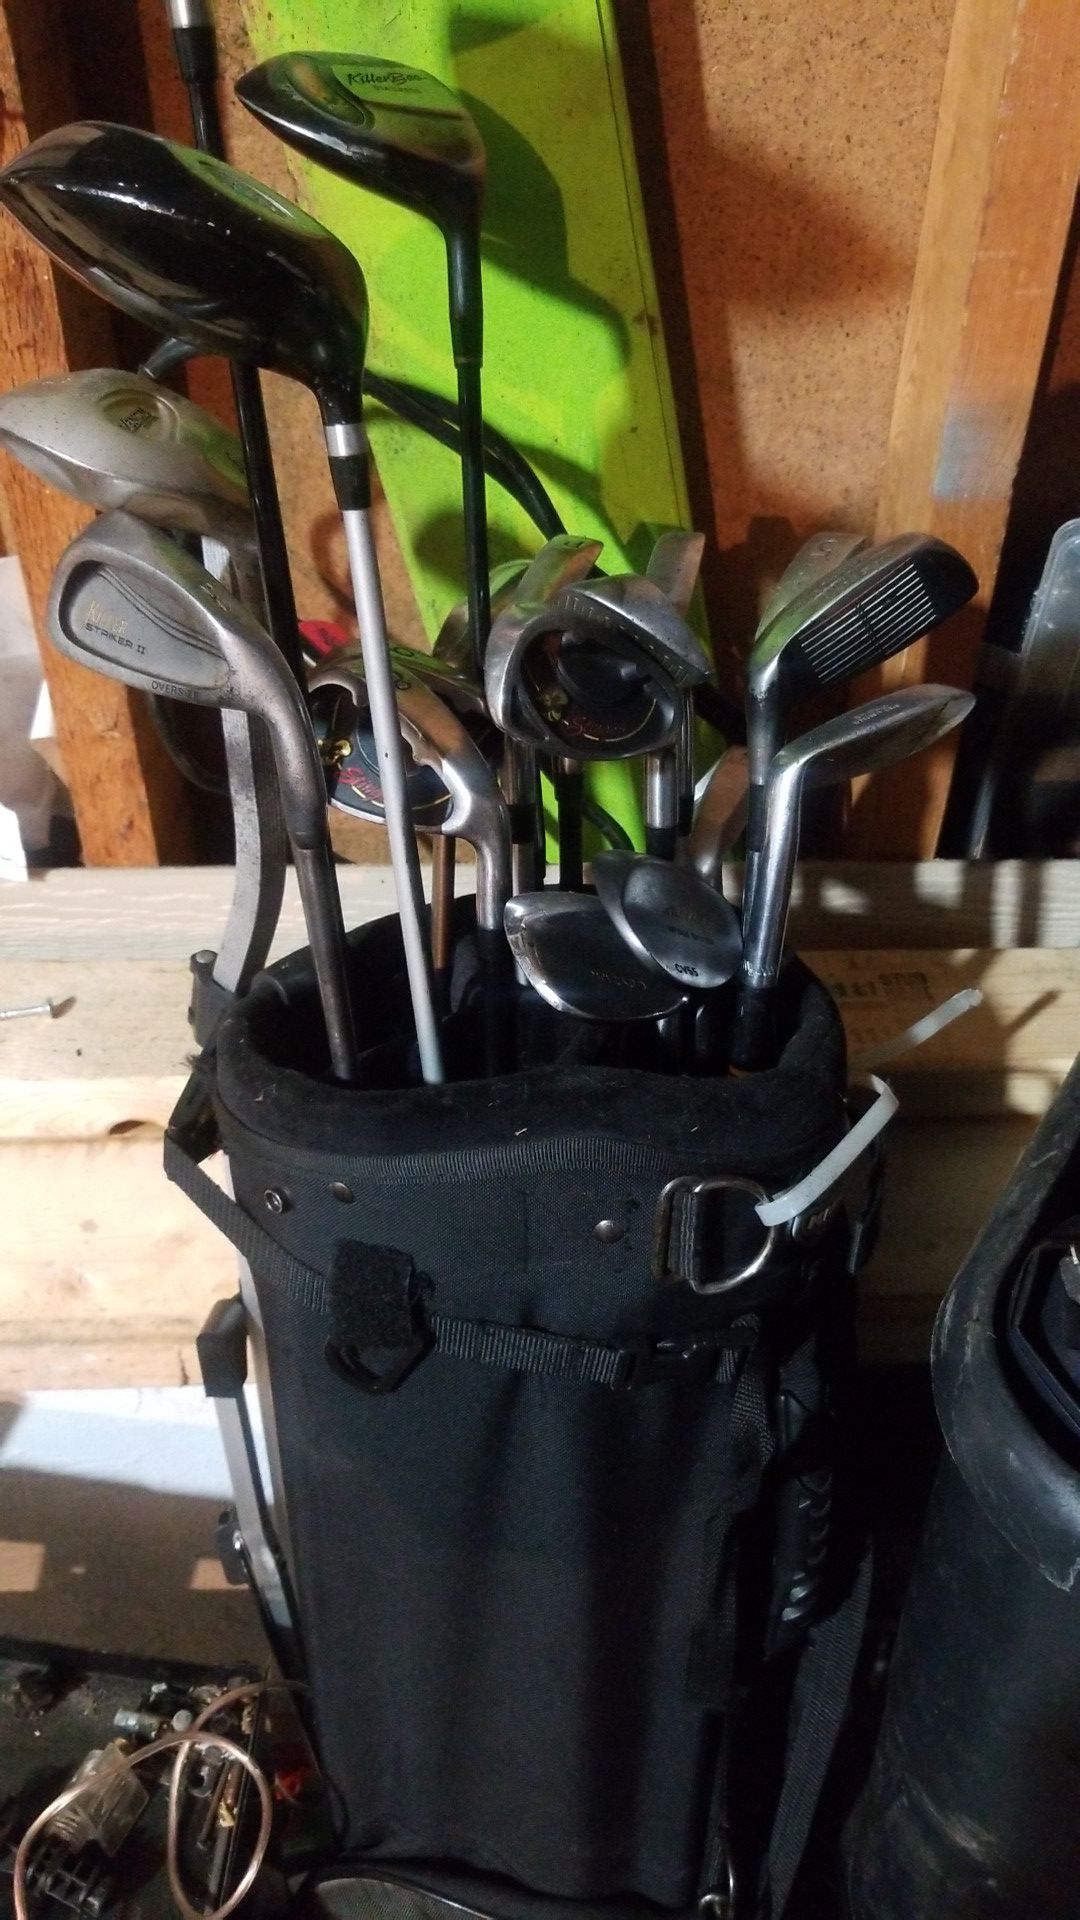 Golf Clubs with bag. Drivers, Irons, wedges, putter